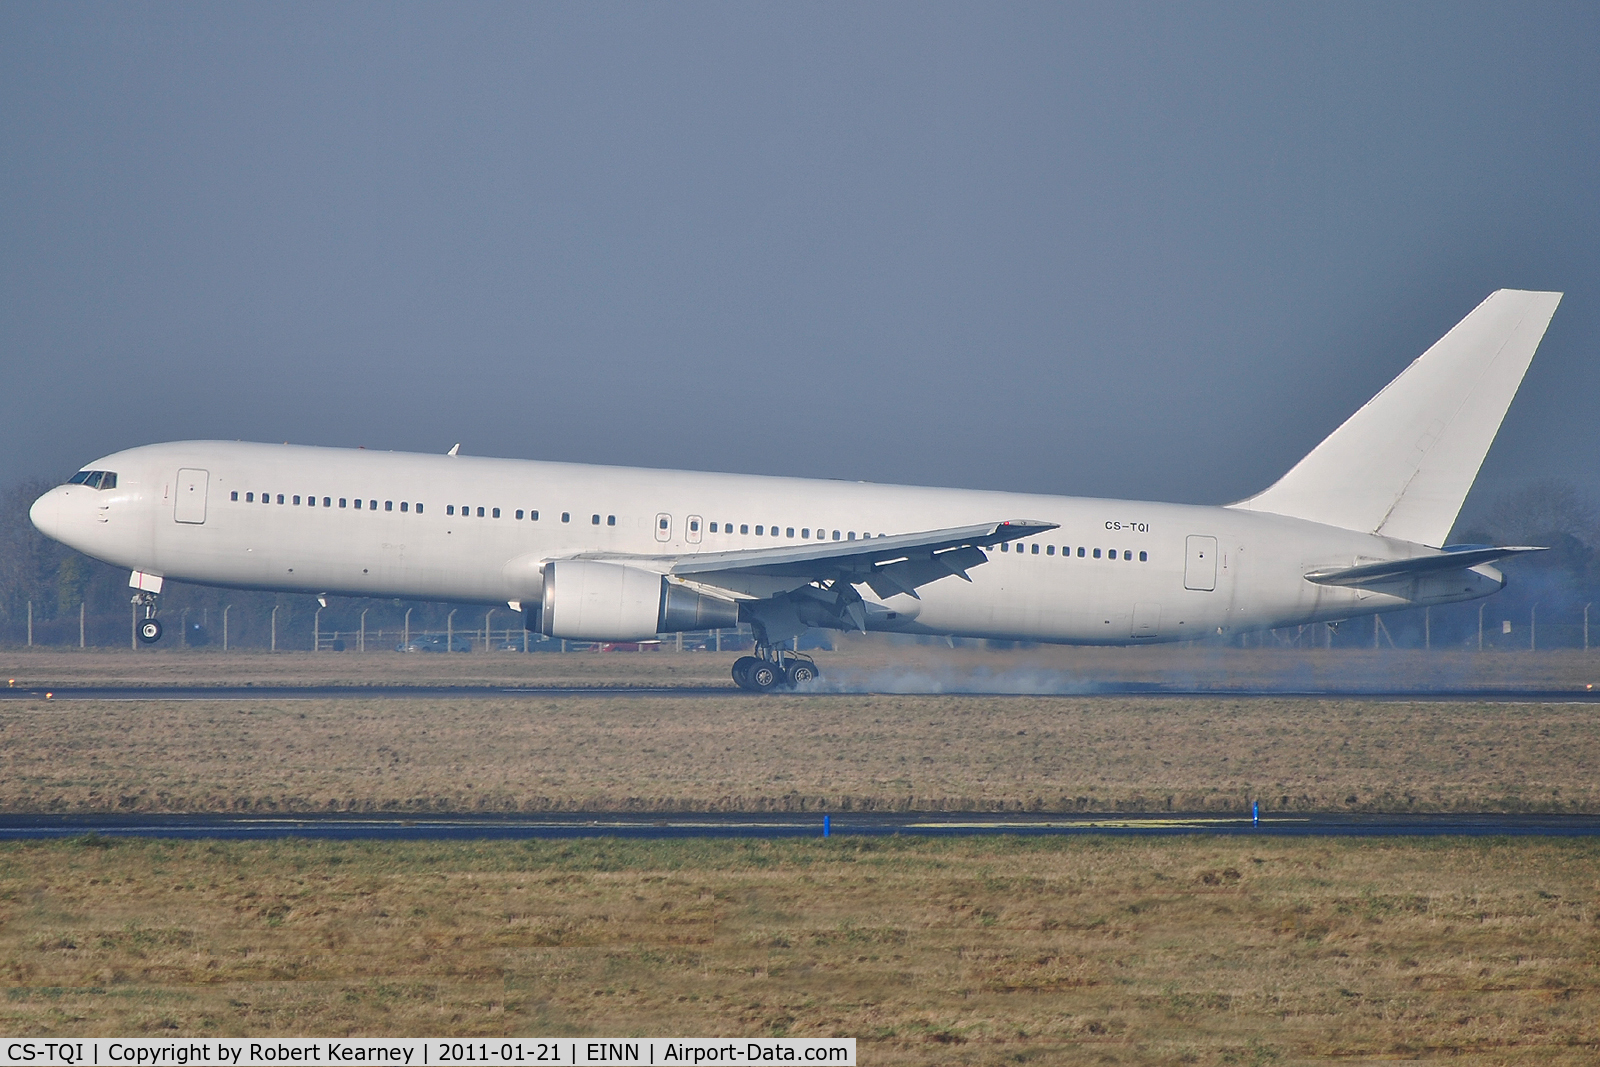 CS-TQI, 1991 Boeing 767-3S1/ER C/N 25221, Making a smoky touch-down